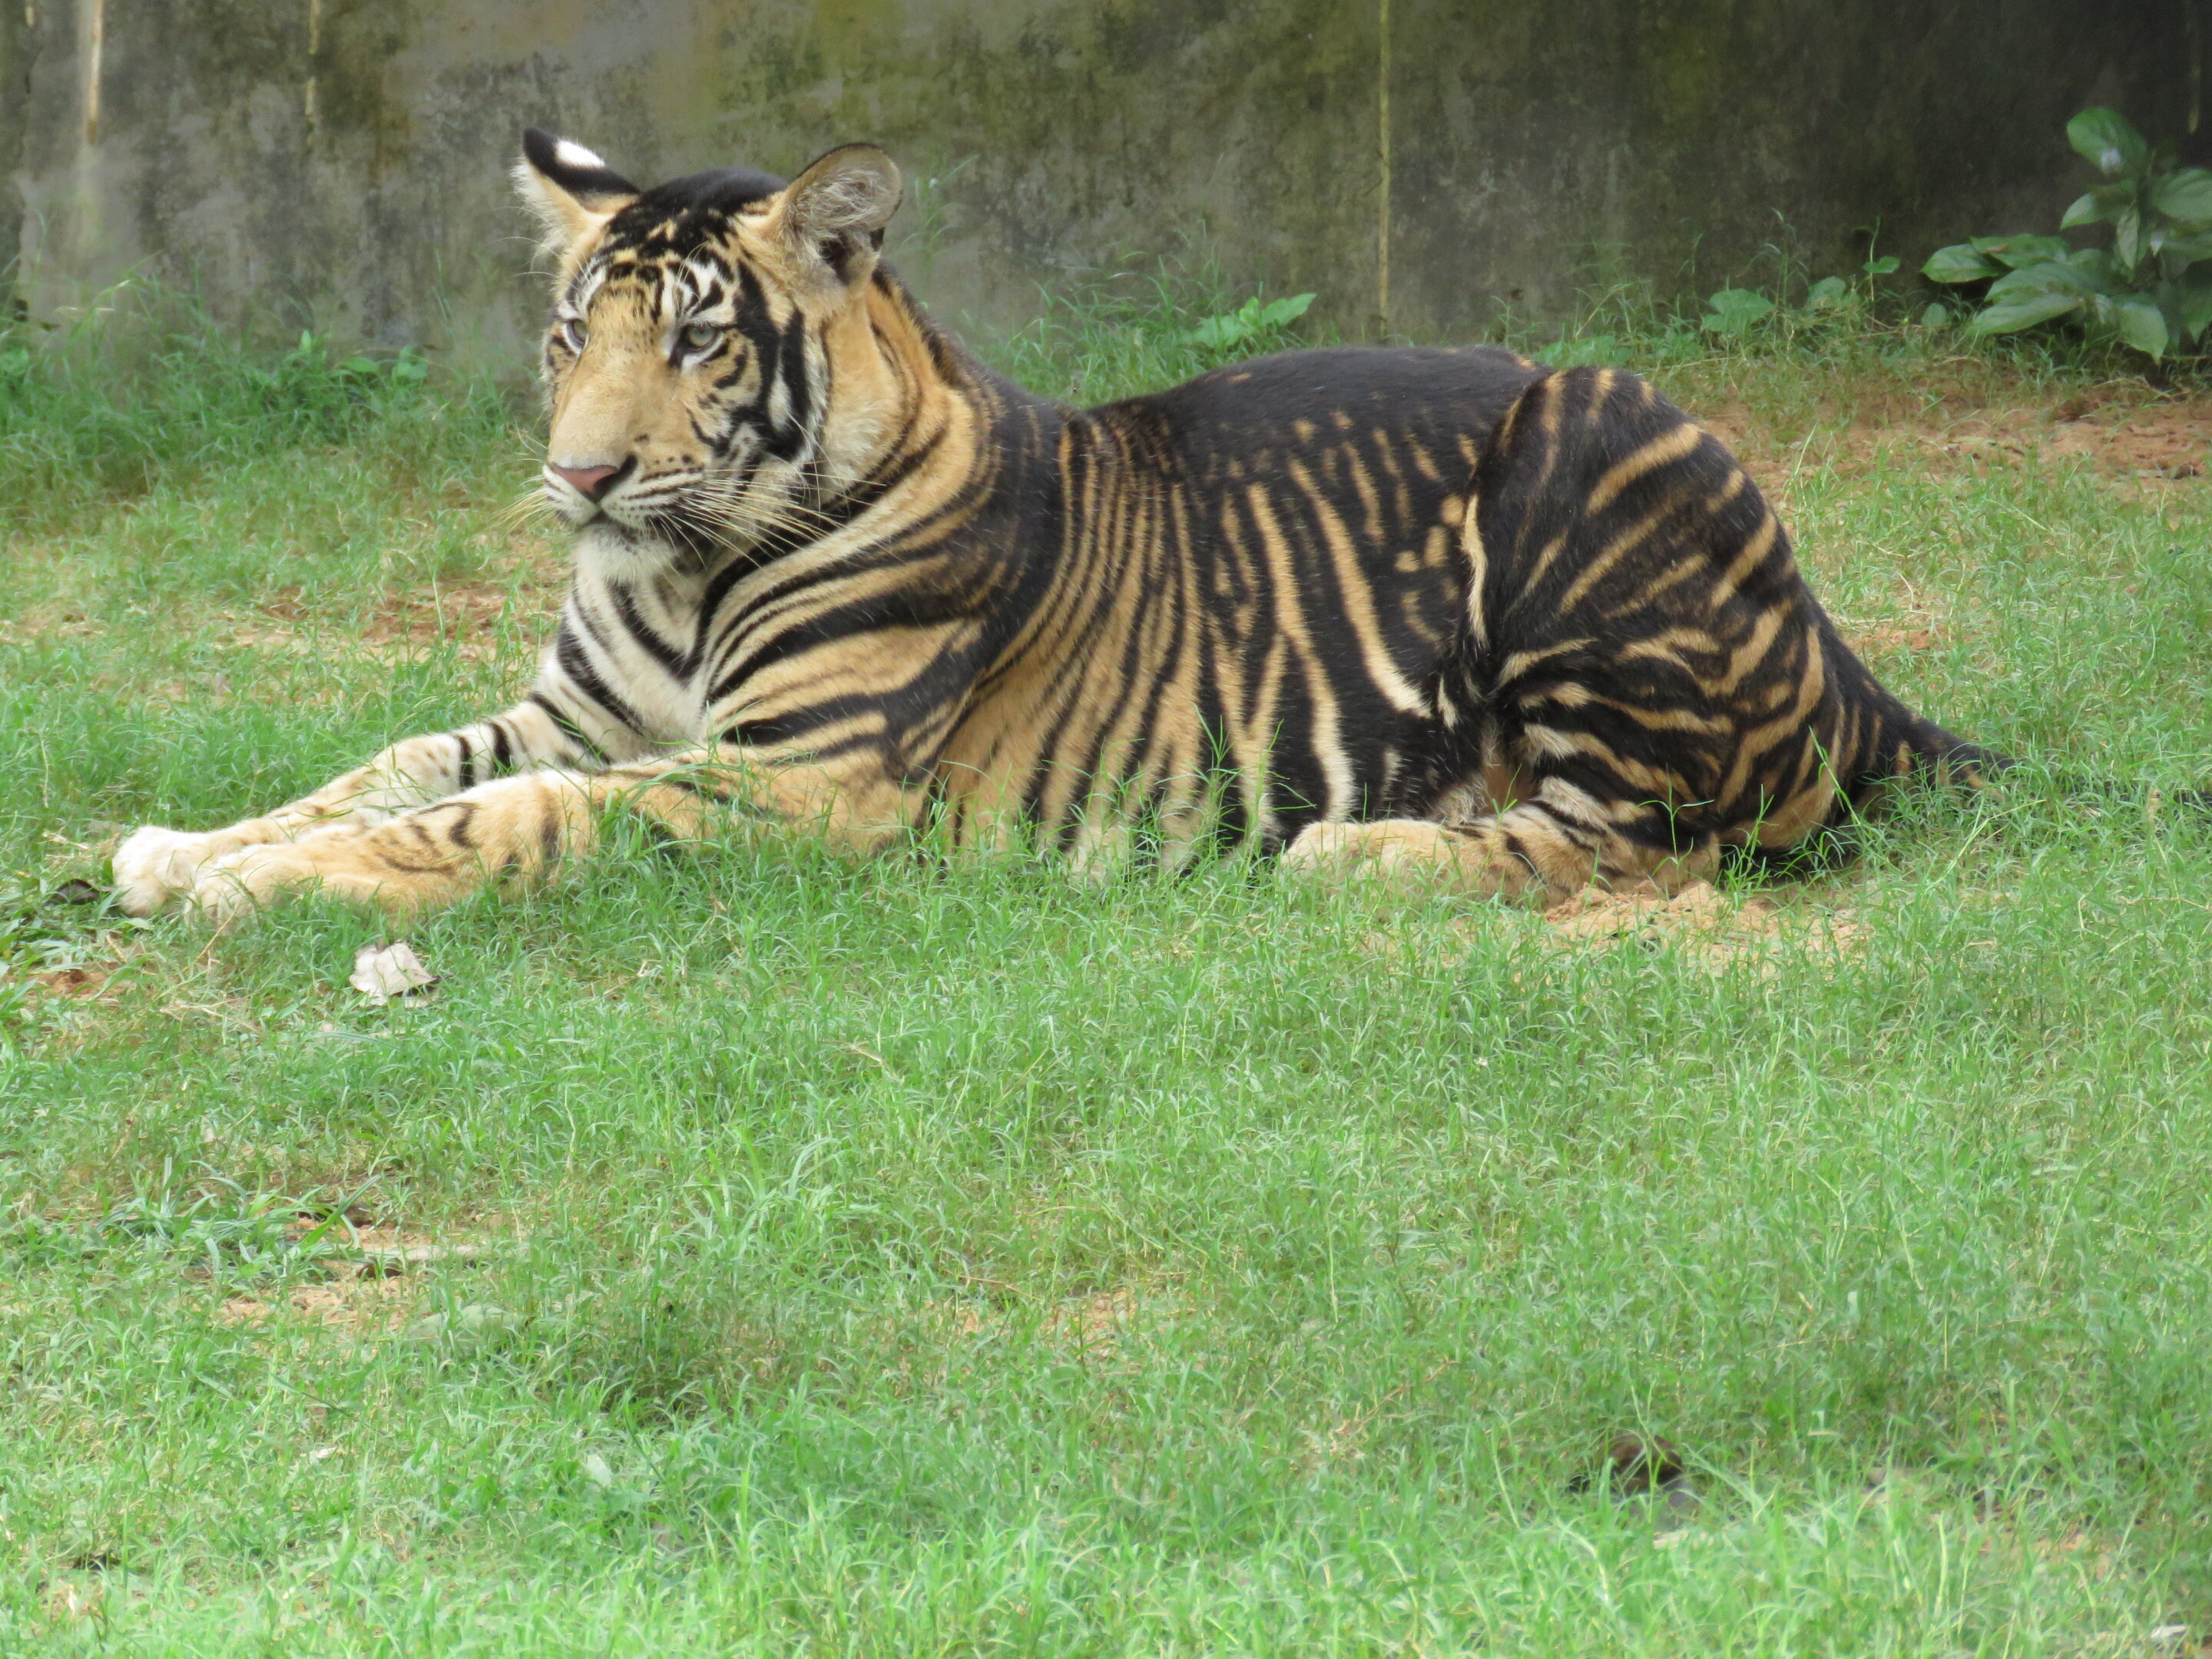 Why is it that no two tigers have the same stripes? - Quora